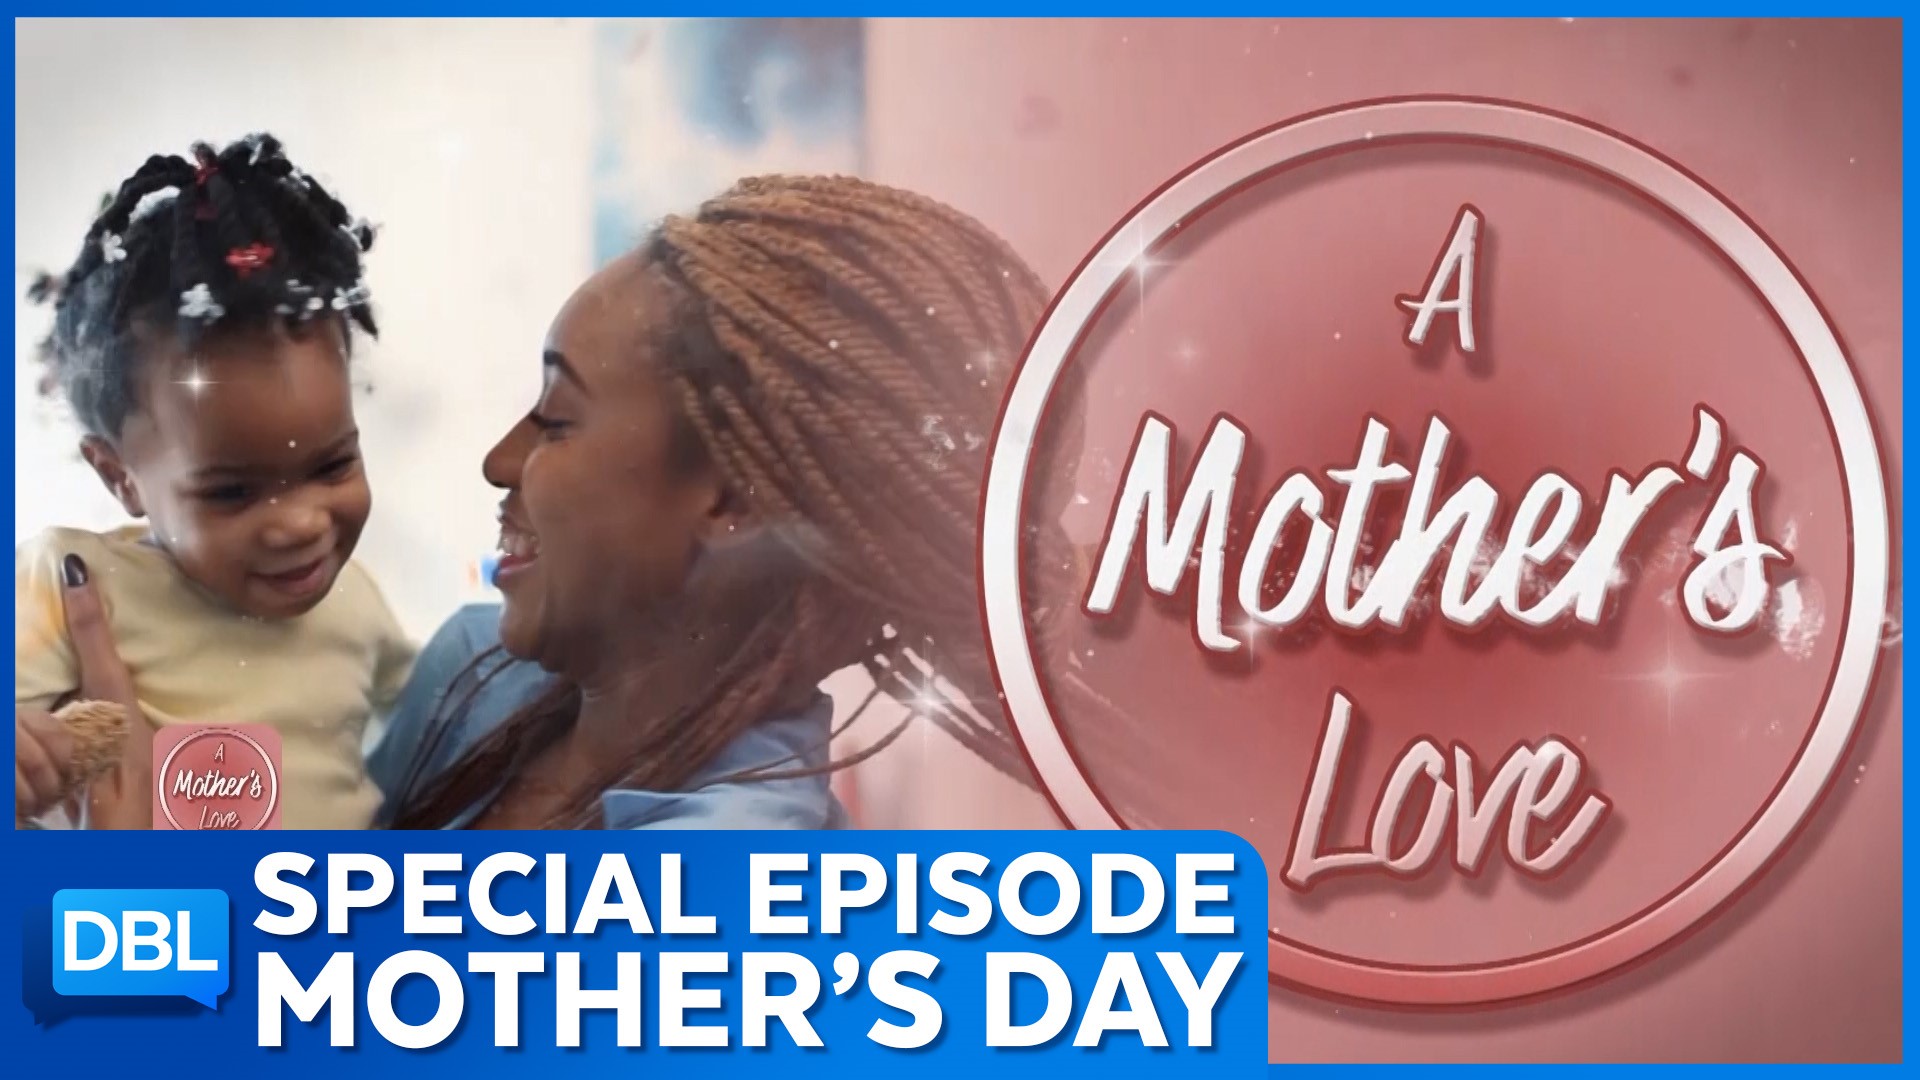 DBL dedicates the episode to amazing moms with heartfelt stories that will leave you feeling inspired.